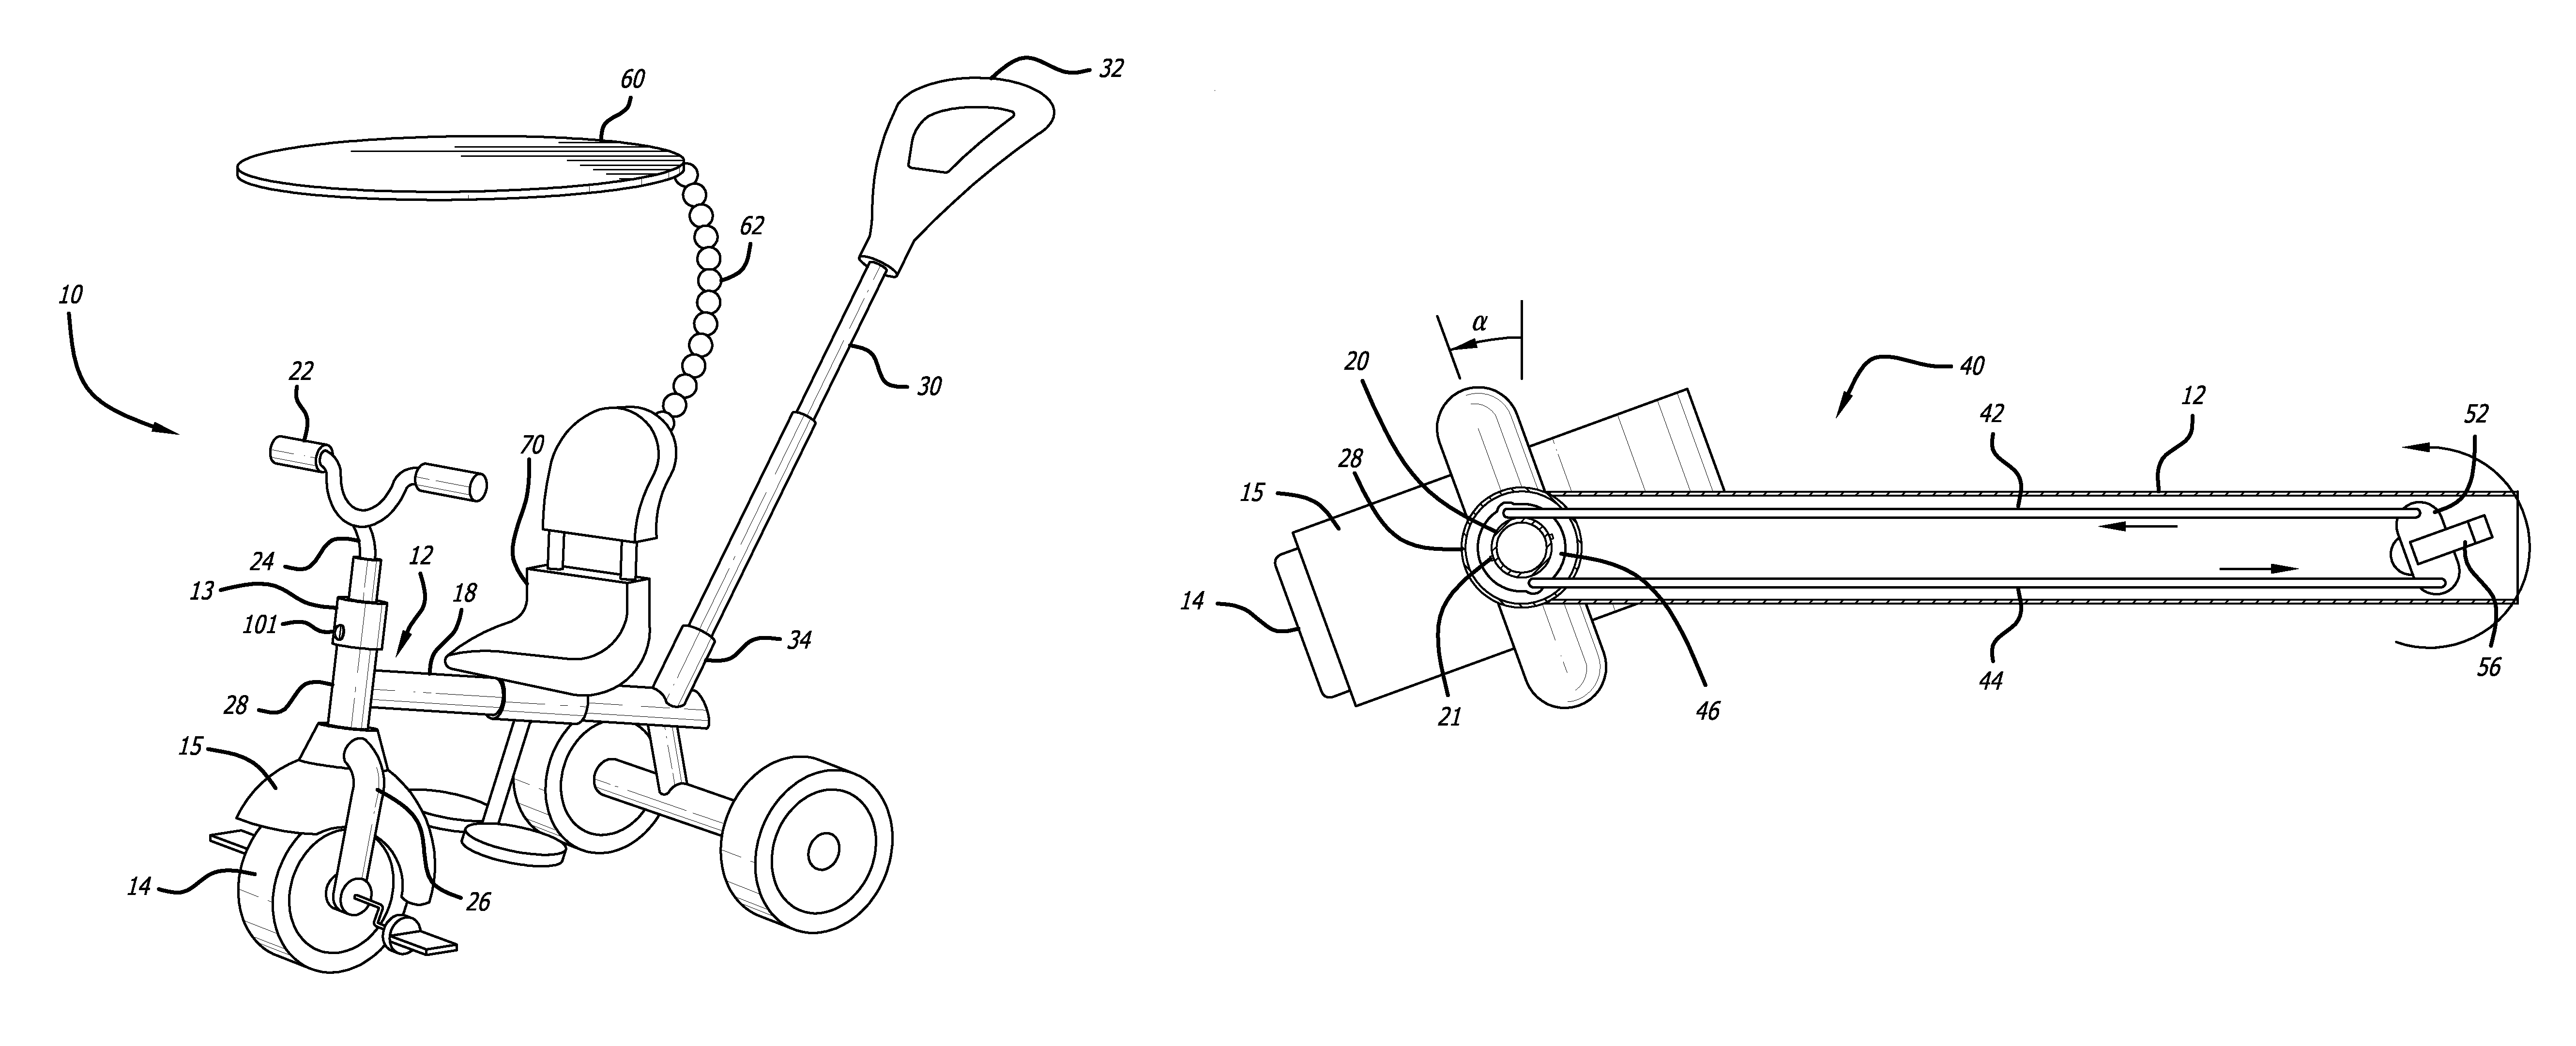 Parent steerable tricycle with internal steering limiter